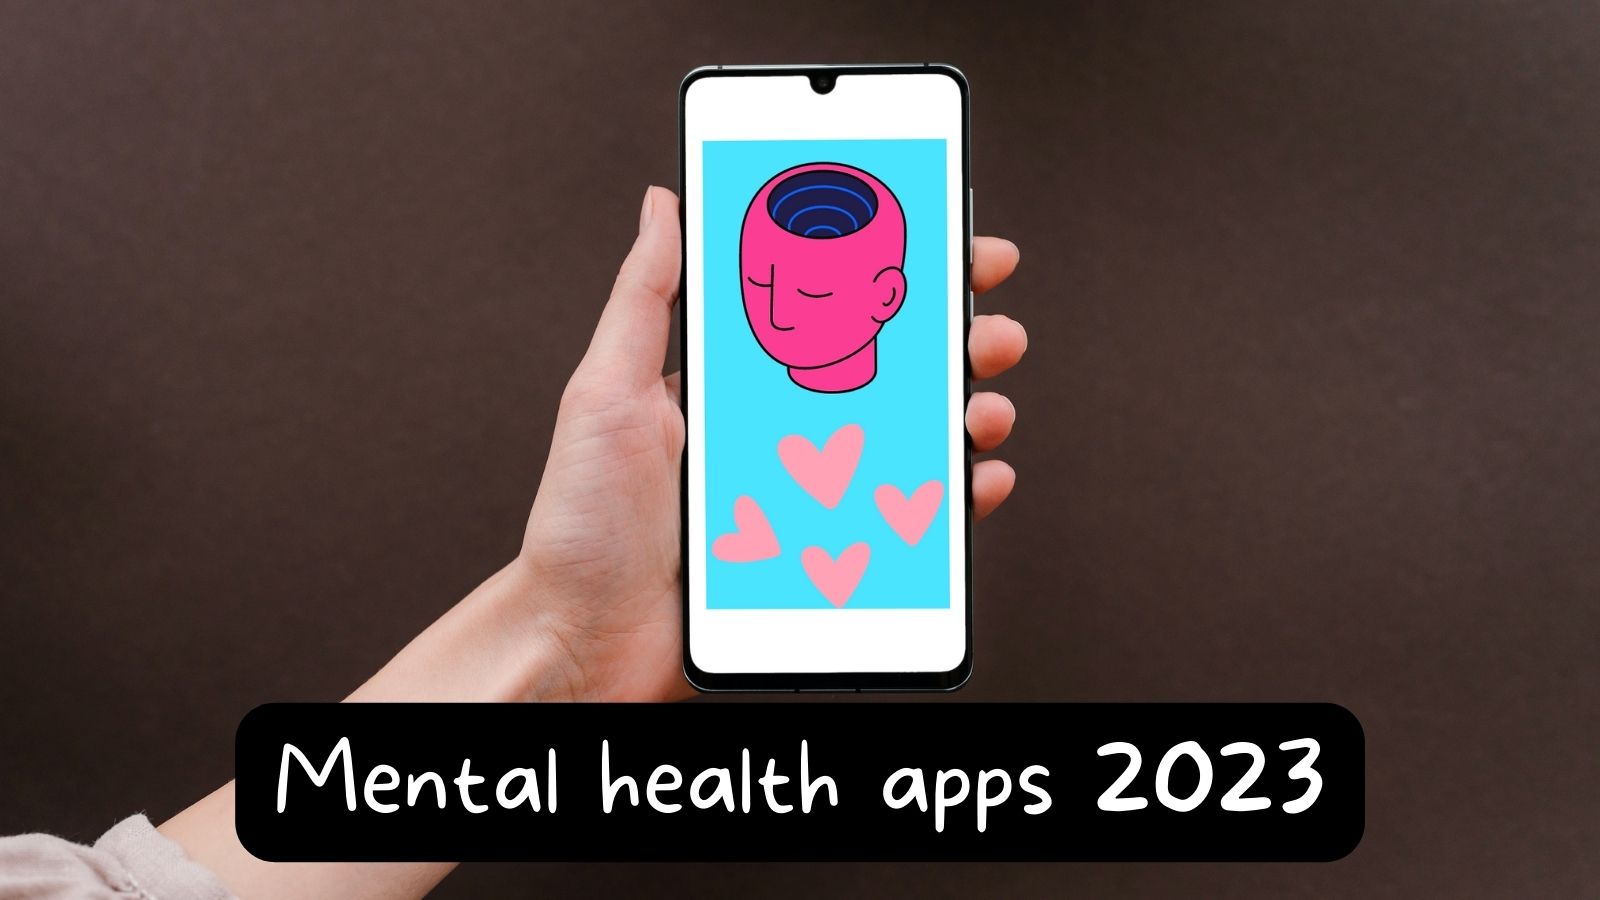 List of mental health apps